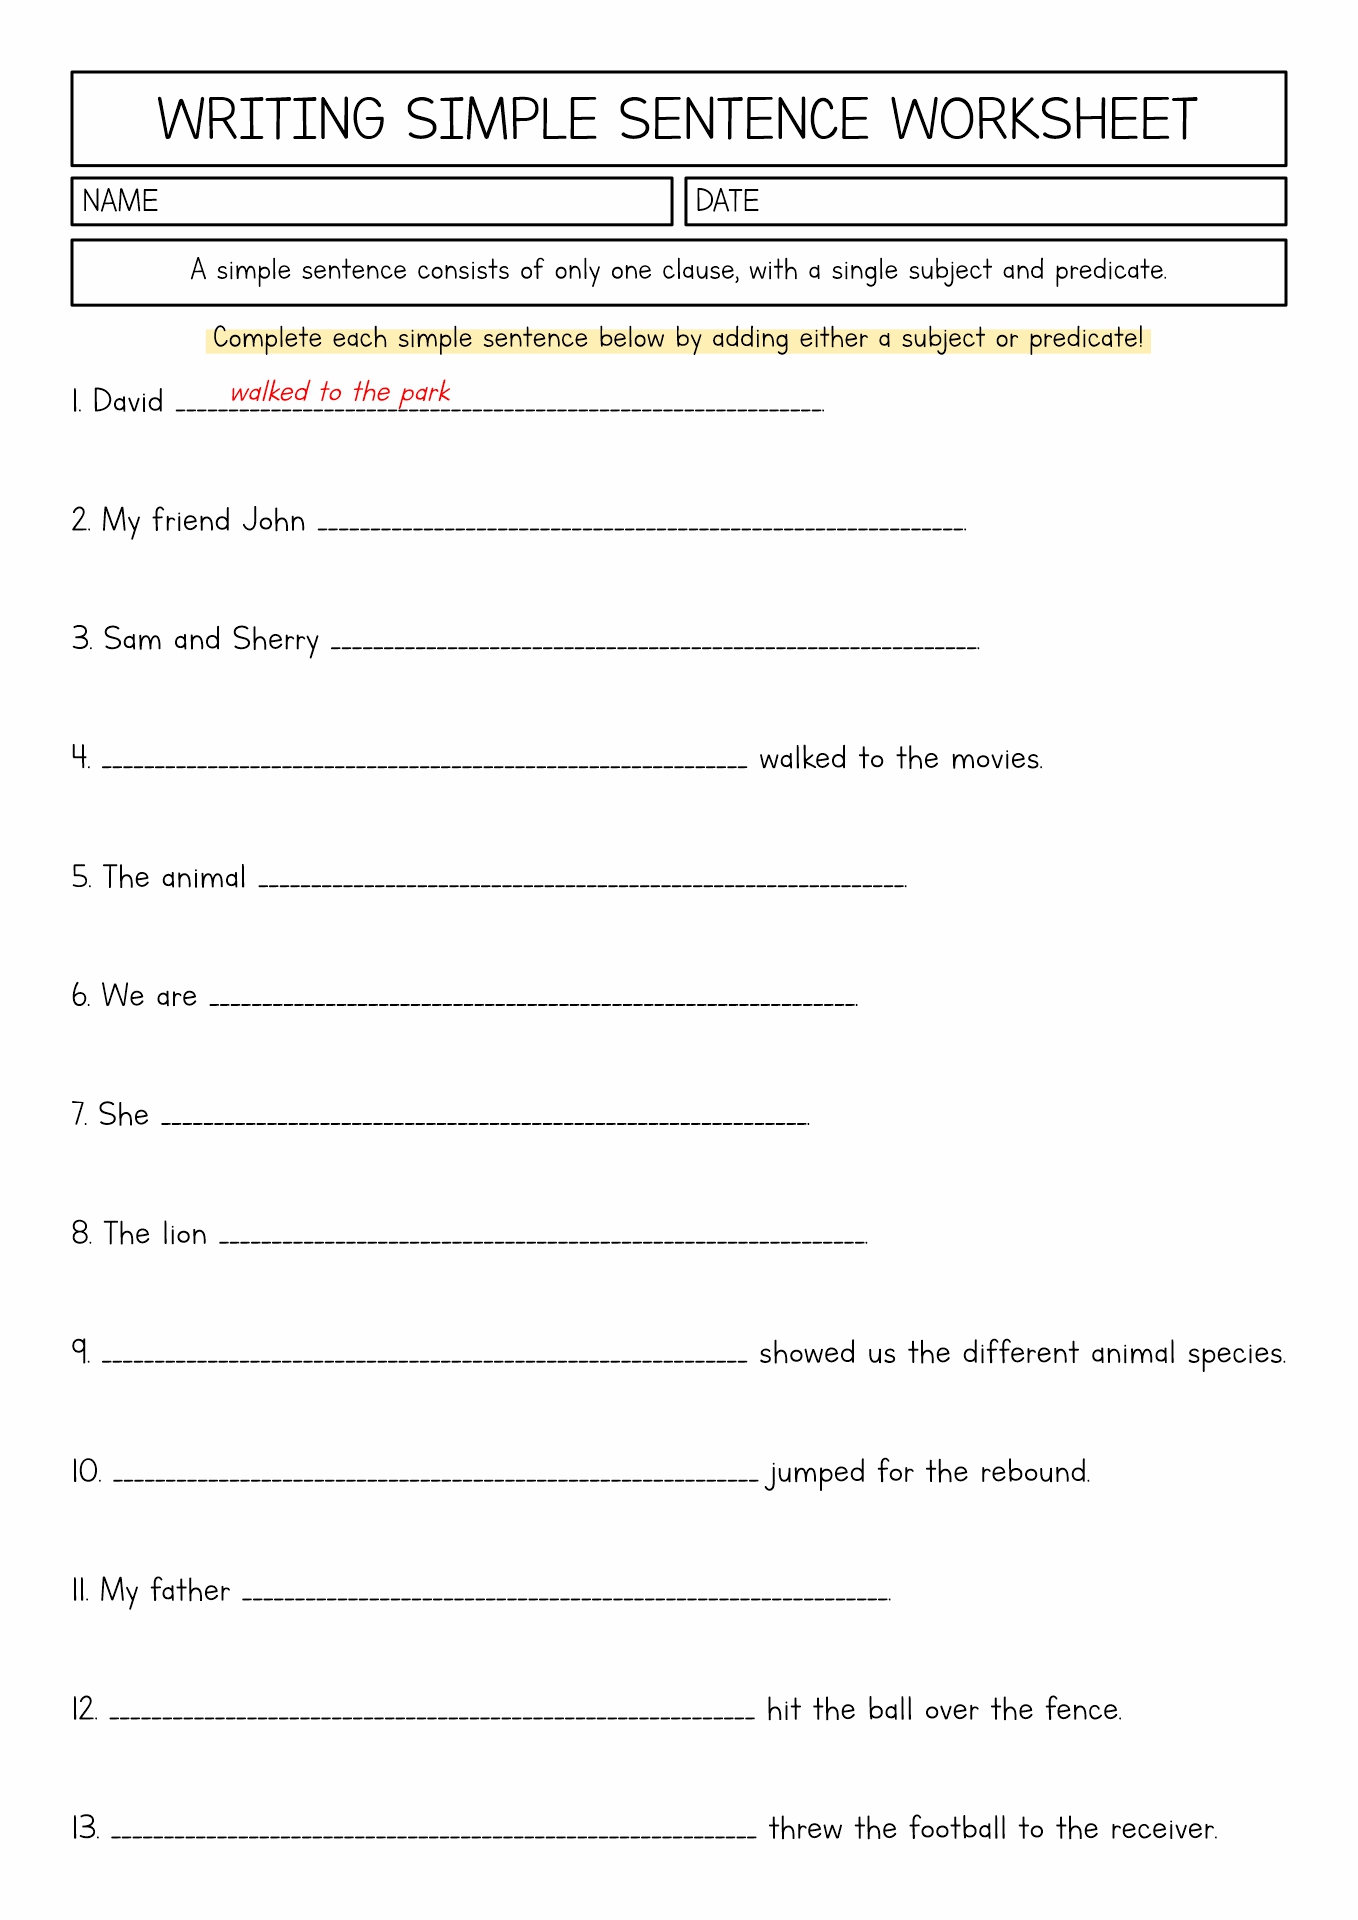 18 Best Images Of 4th Grade Essay Writing Worksheets Free Creative Writing Activities 4th